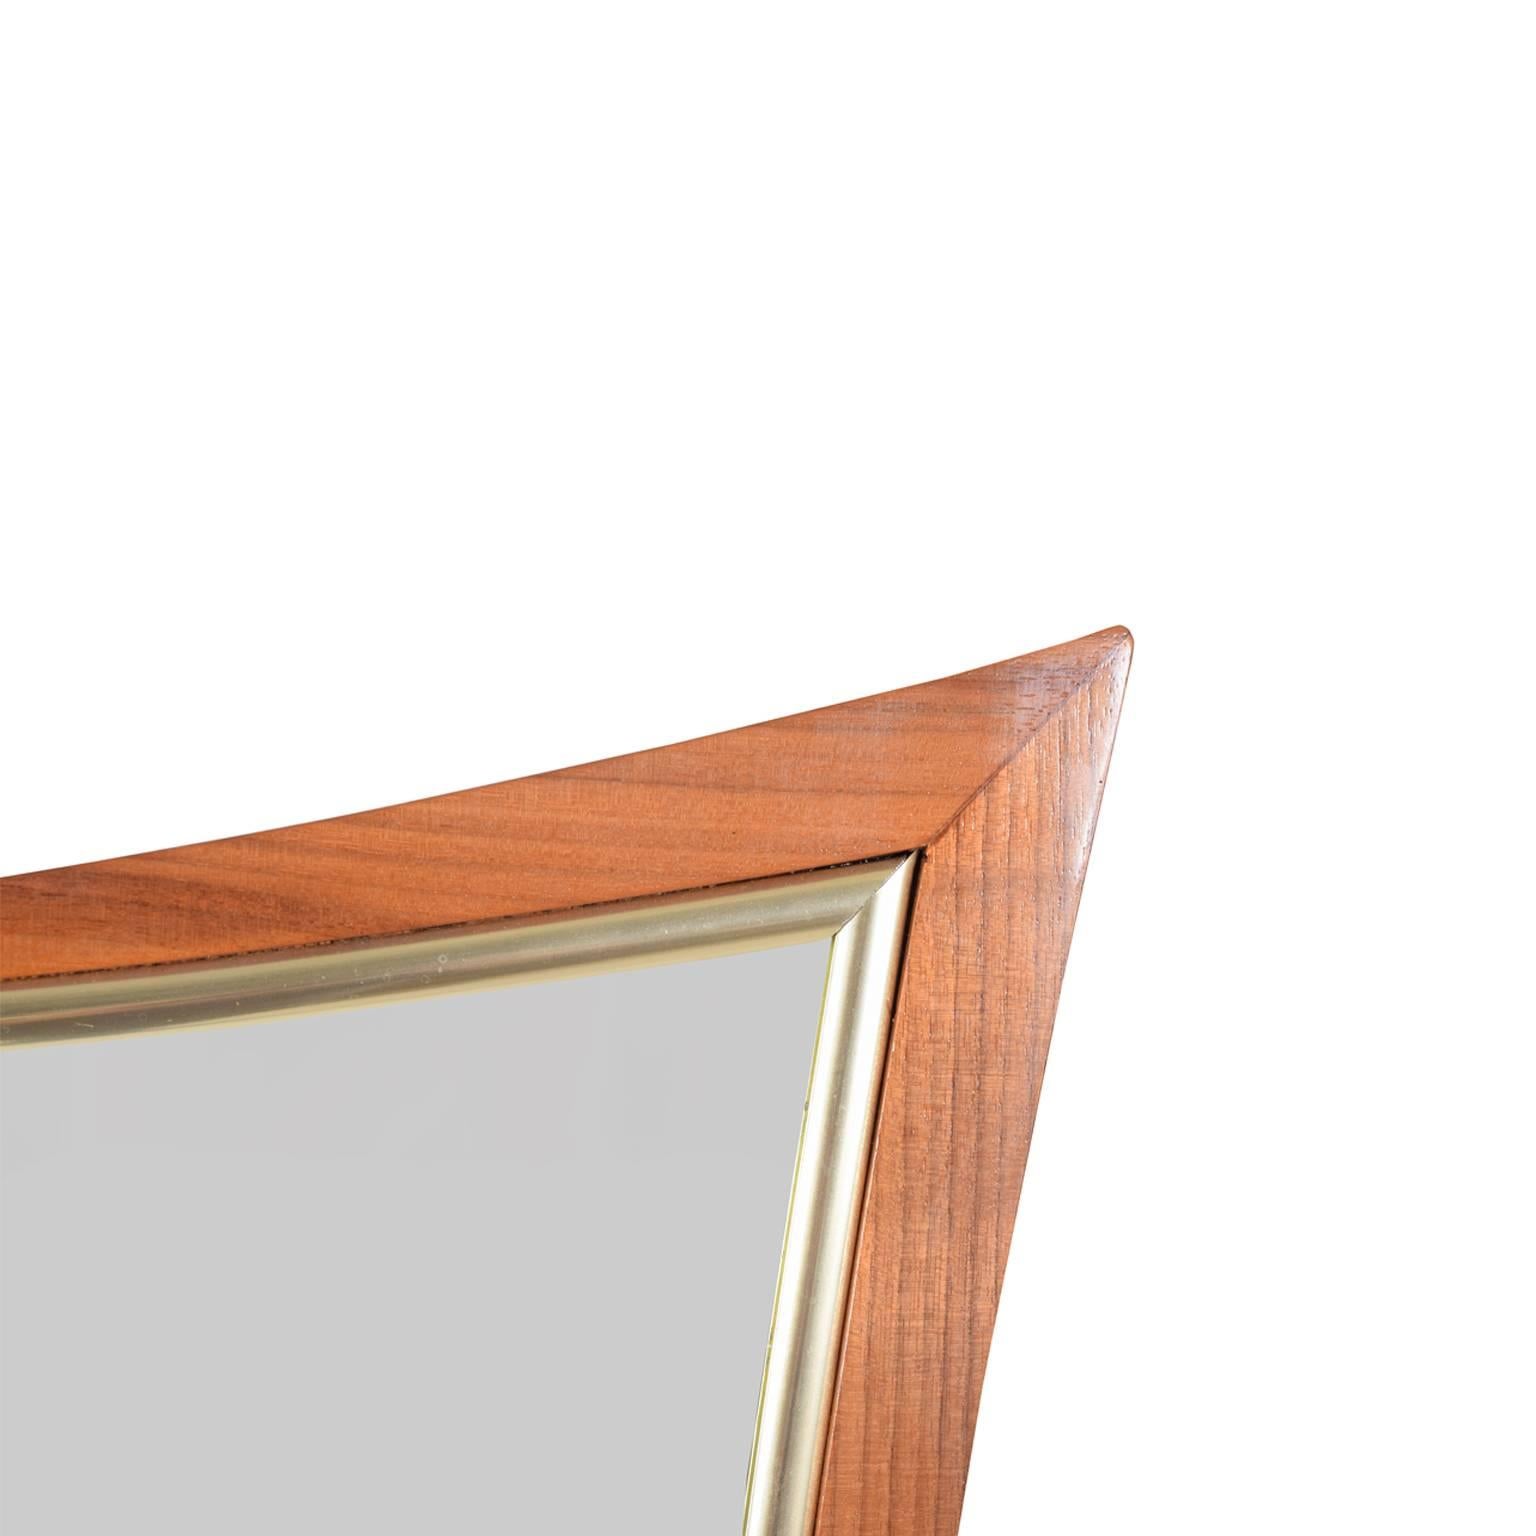 Two sculptural solid walnut and gold stained trim mirrors designed by William Hinn for Urban Furniture. Priced individually.